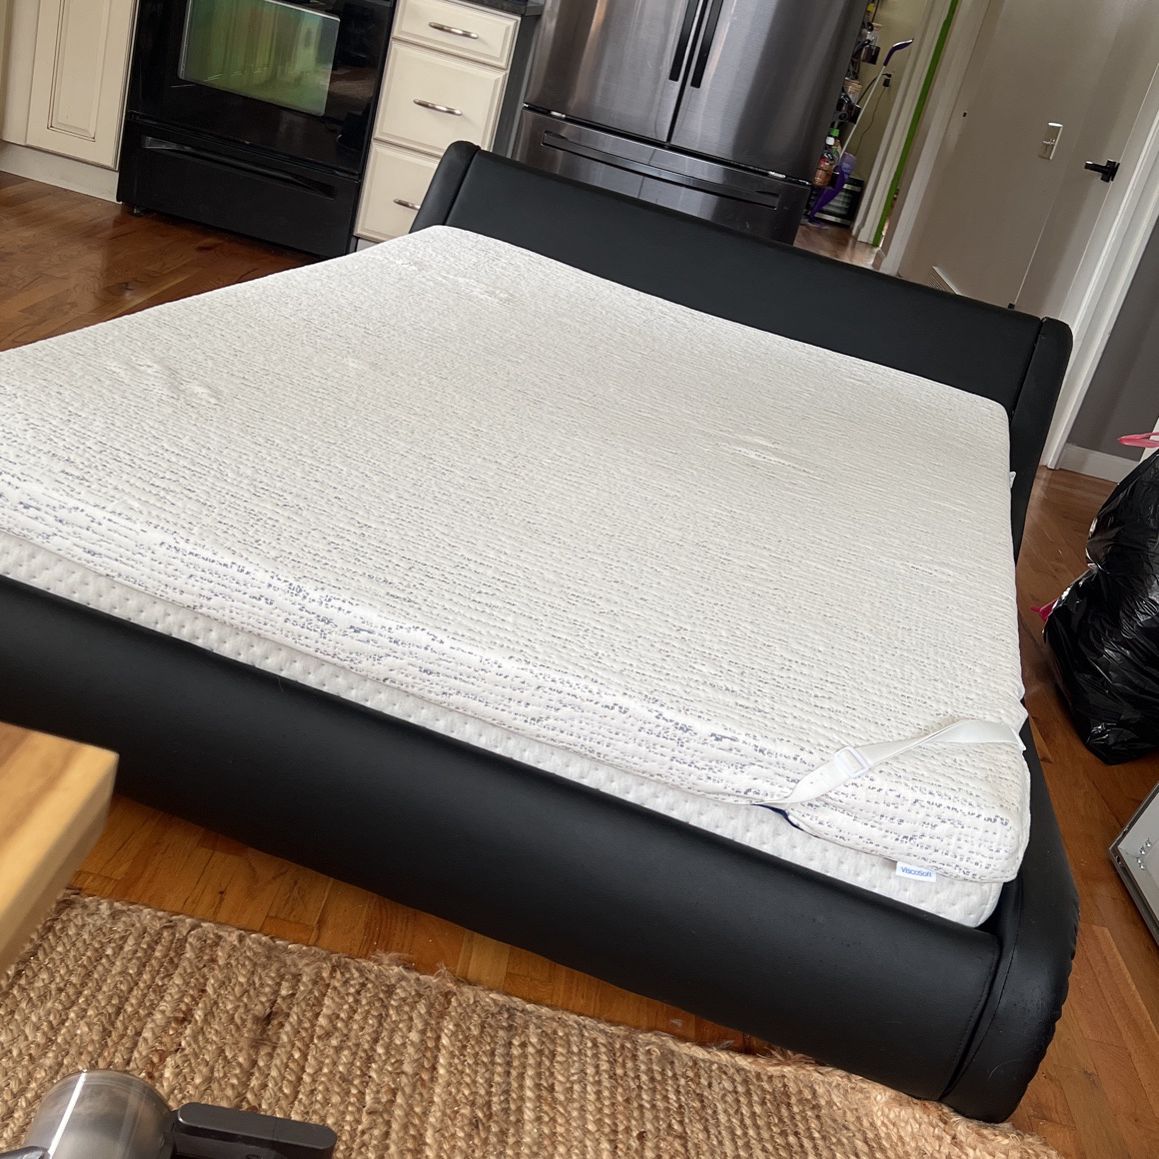 Sleep Number Full Size Mattress, Pad, And Black Leather Bed Frame